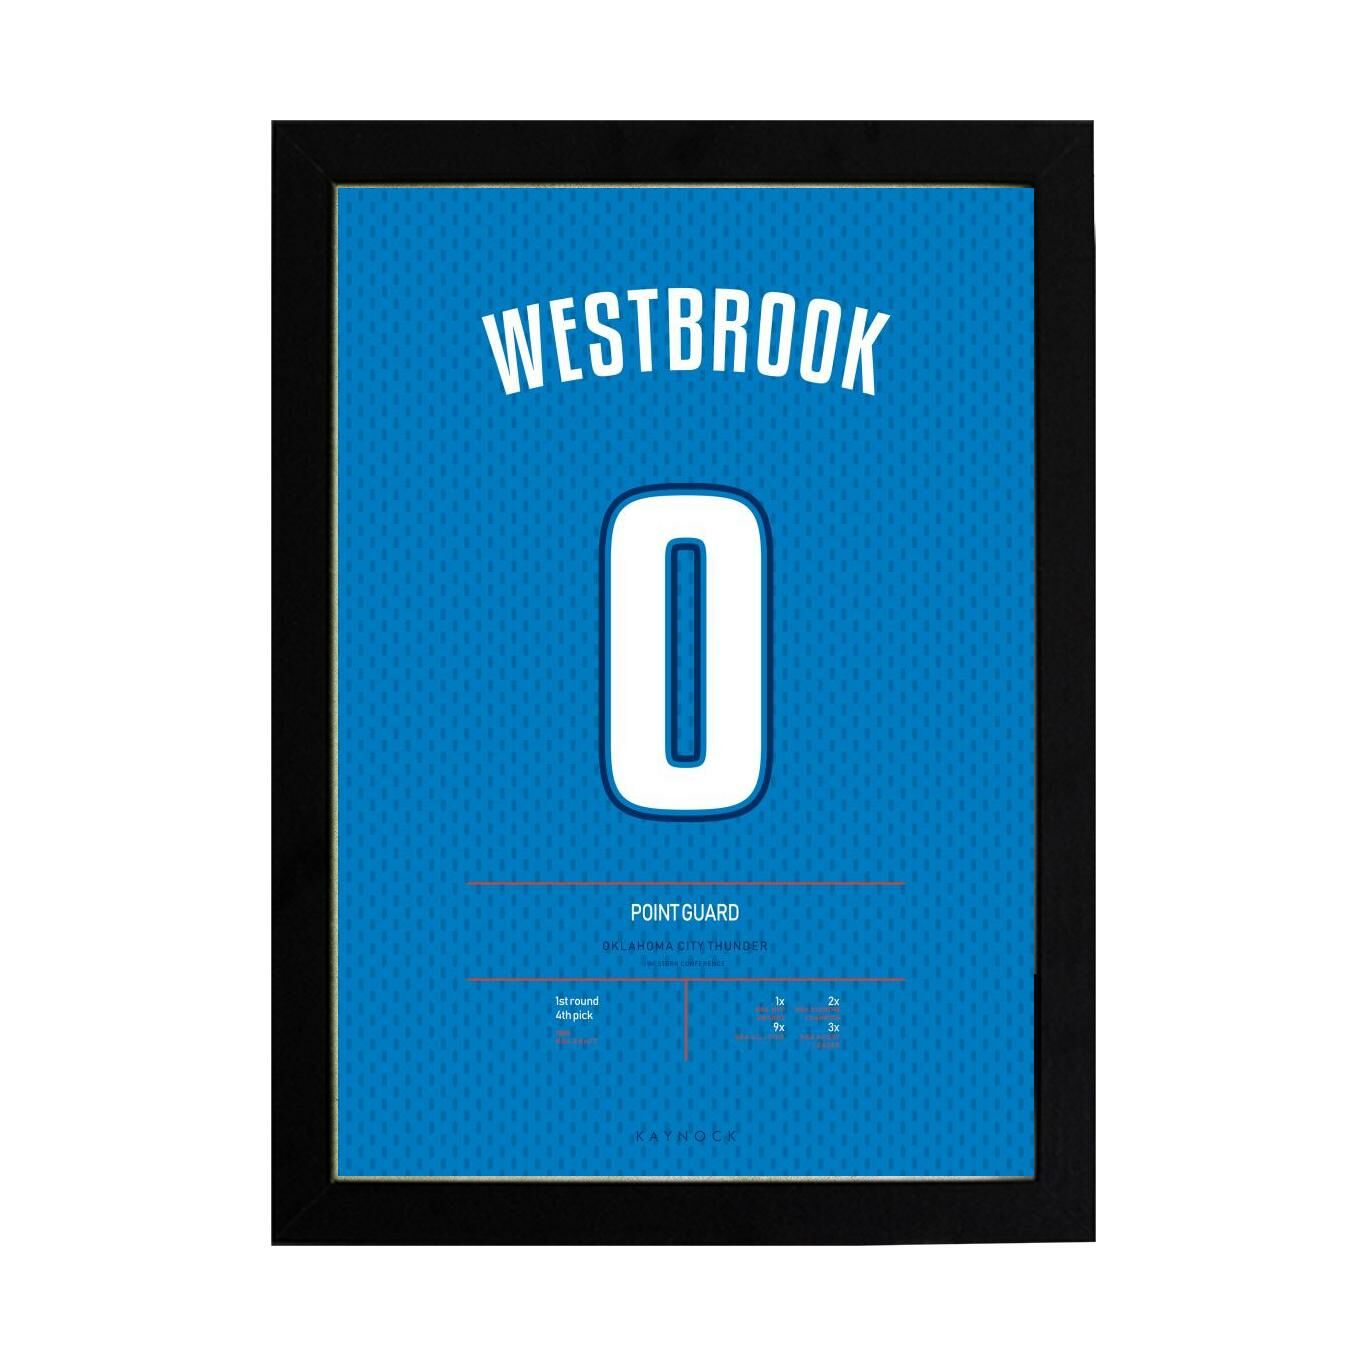 Russell Westbrook Jersey